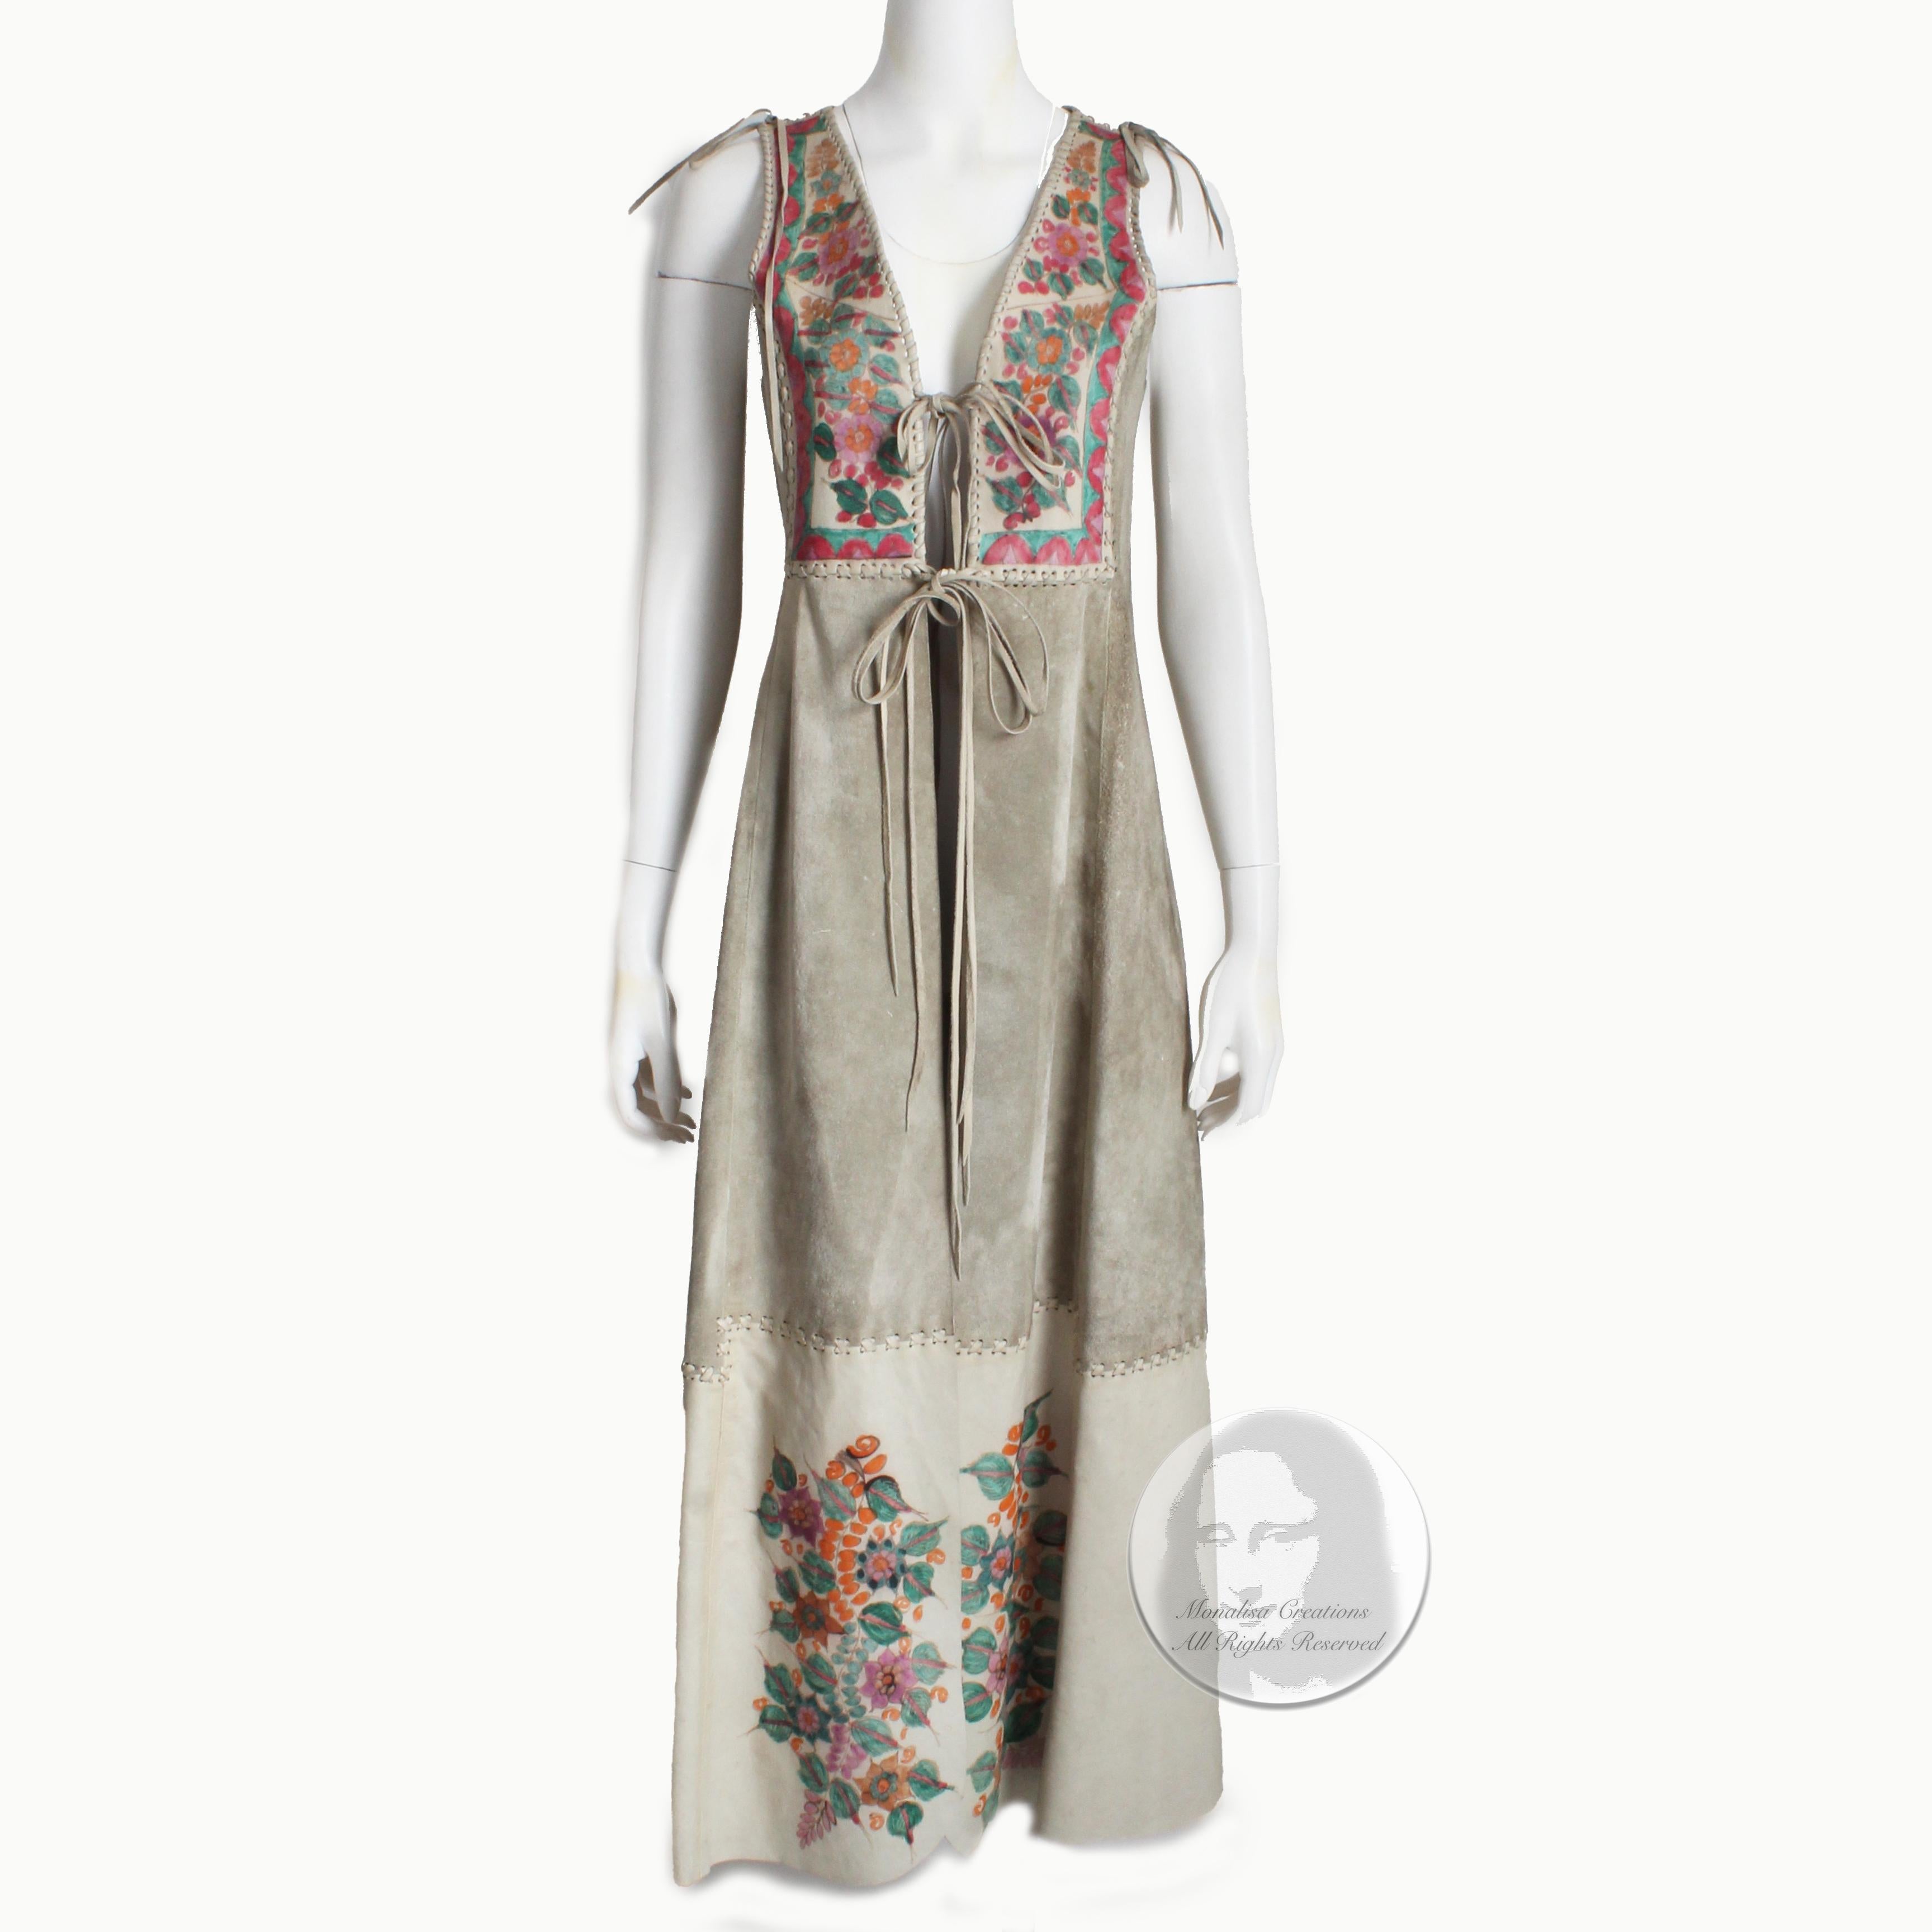 Rare vintage festival vest or dress designed by CHAR, Charlotte Blankenship de Vasquez in the early 70s. Made from an oyster hued suede, it features leather panels with hand-painted florals at the chest, back and lower front panels. 

A super cool